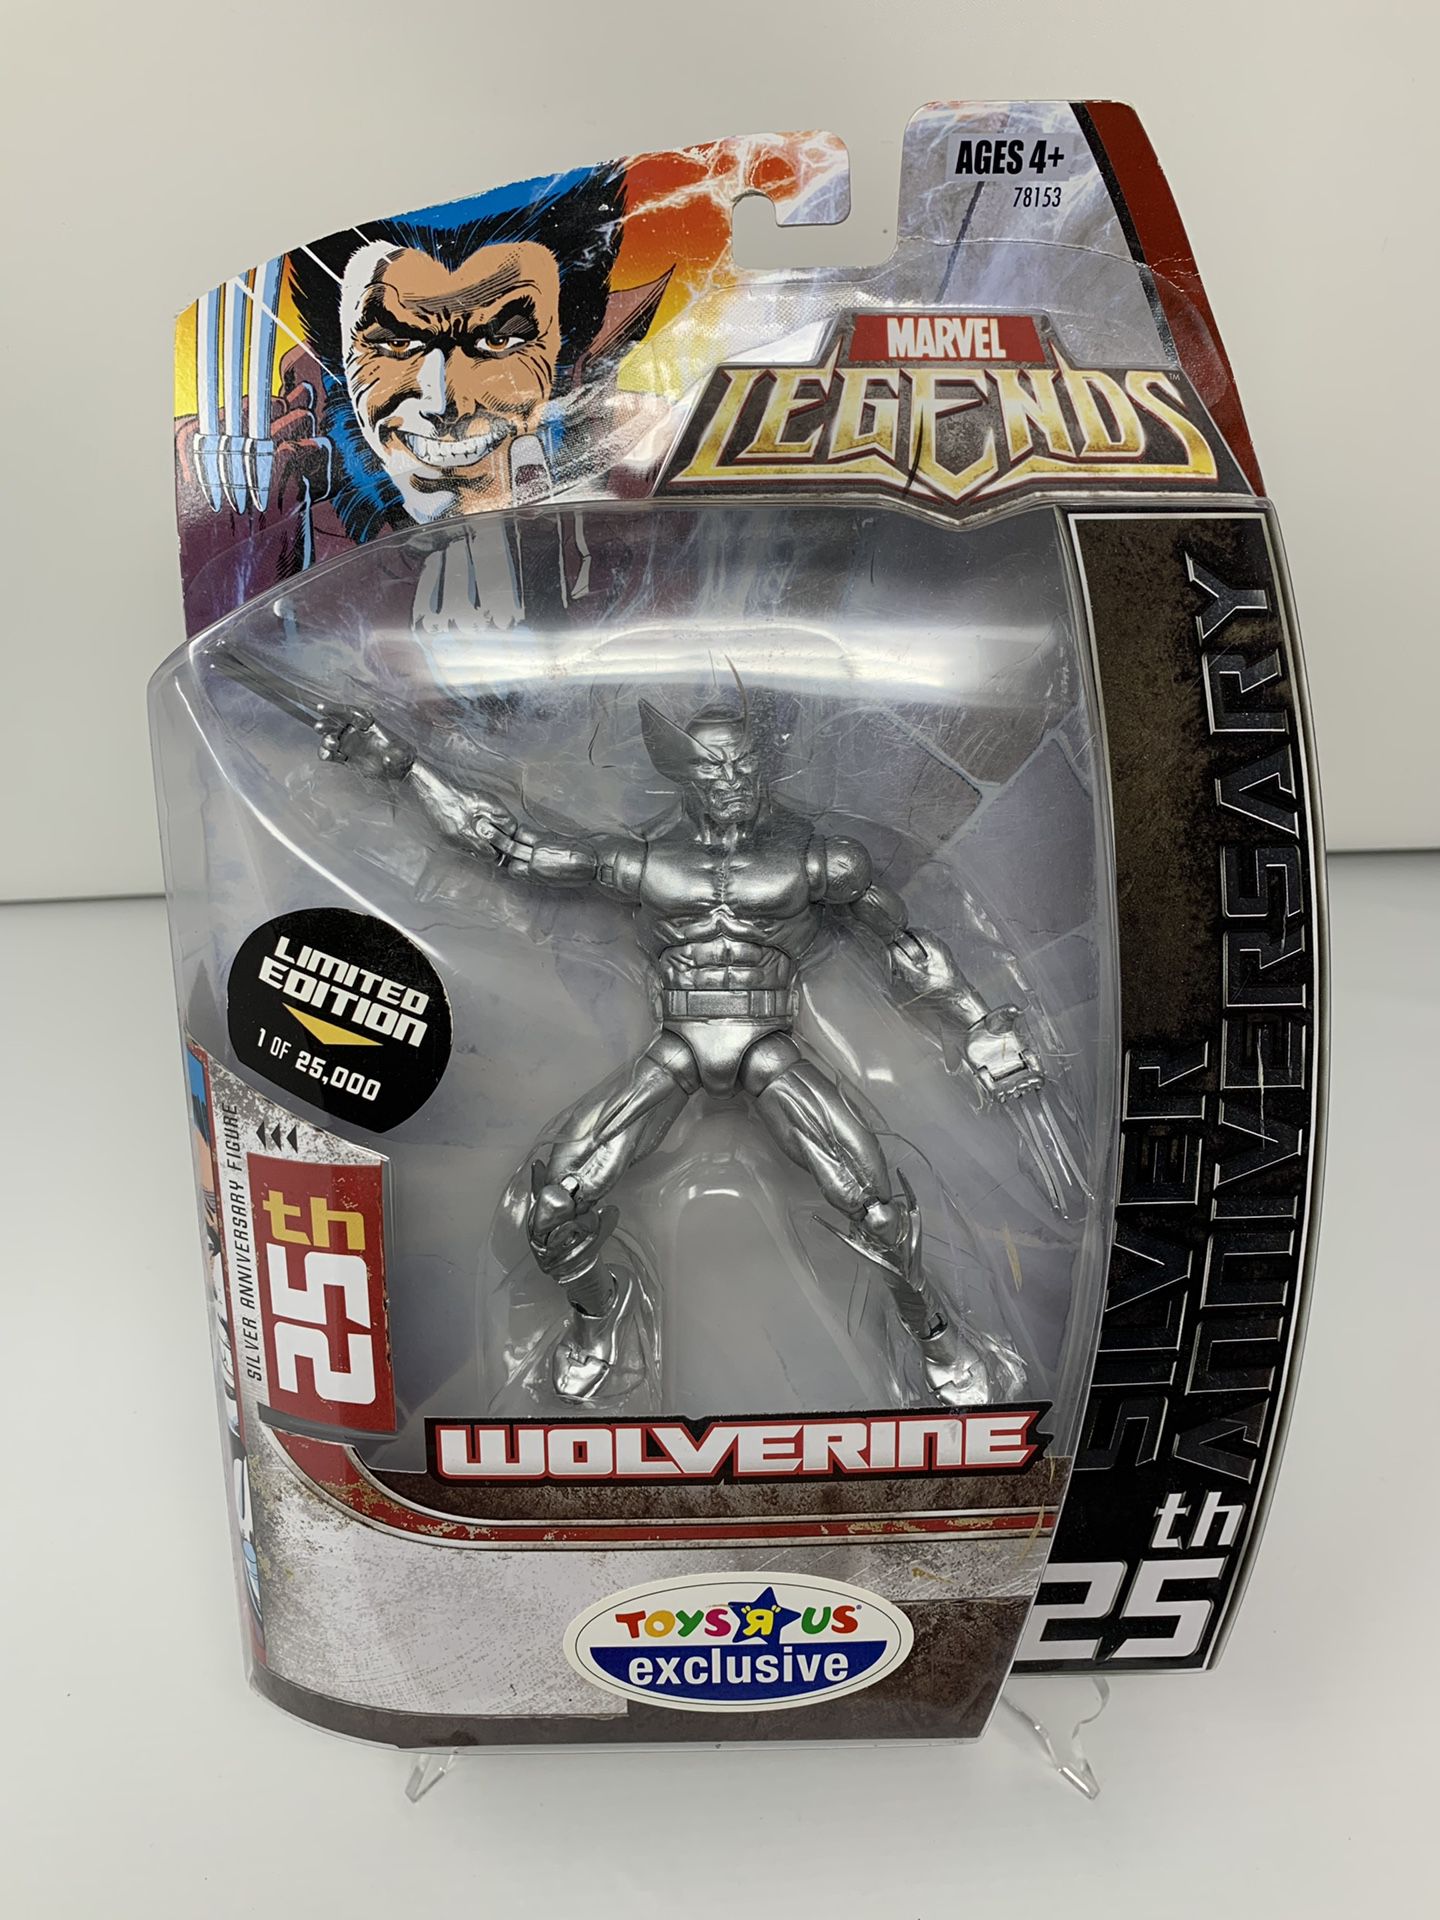 Vintage Limited Edition 25th Silver Anniversary Wolverine Action Figure (Toys “R” Us Exclusive[RIP])